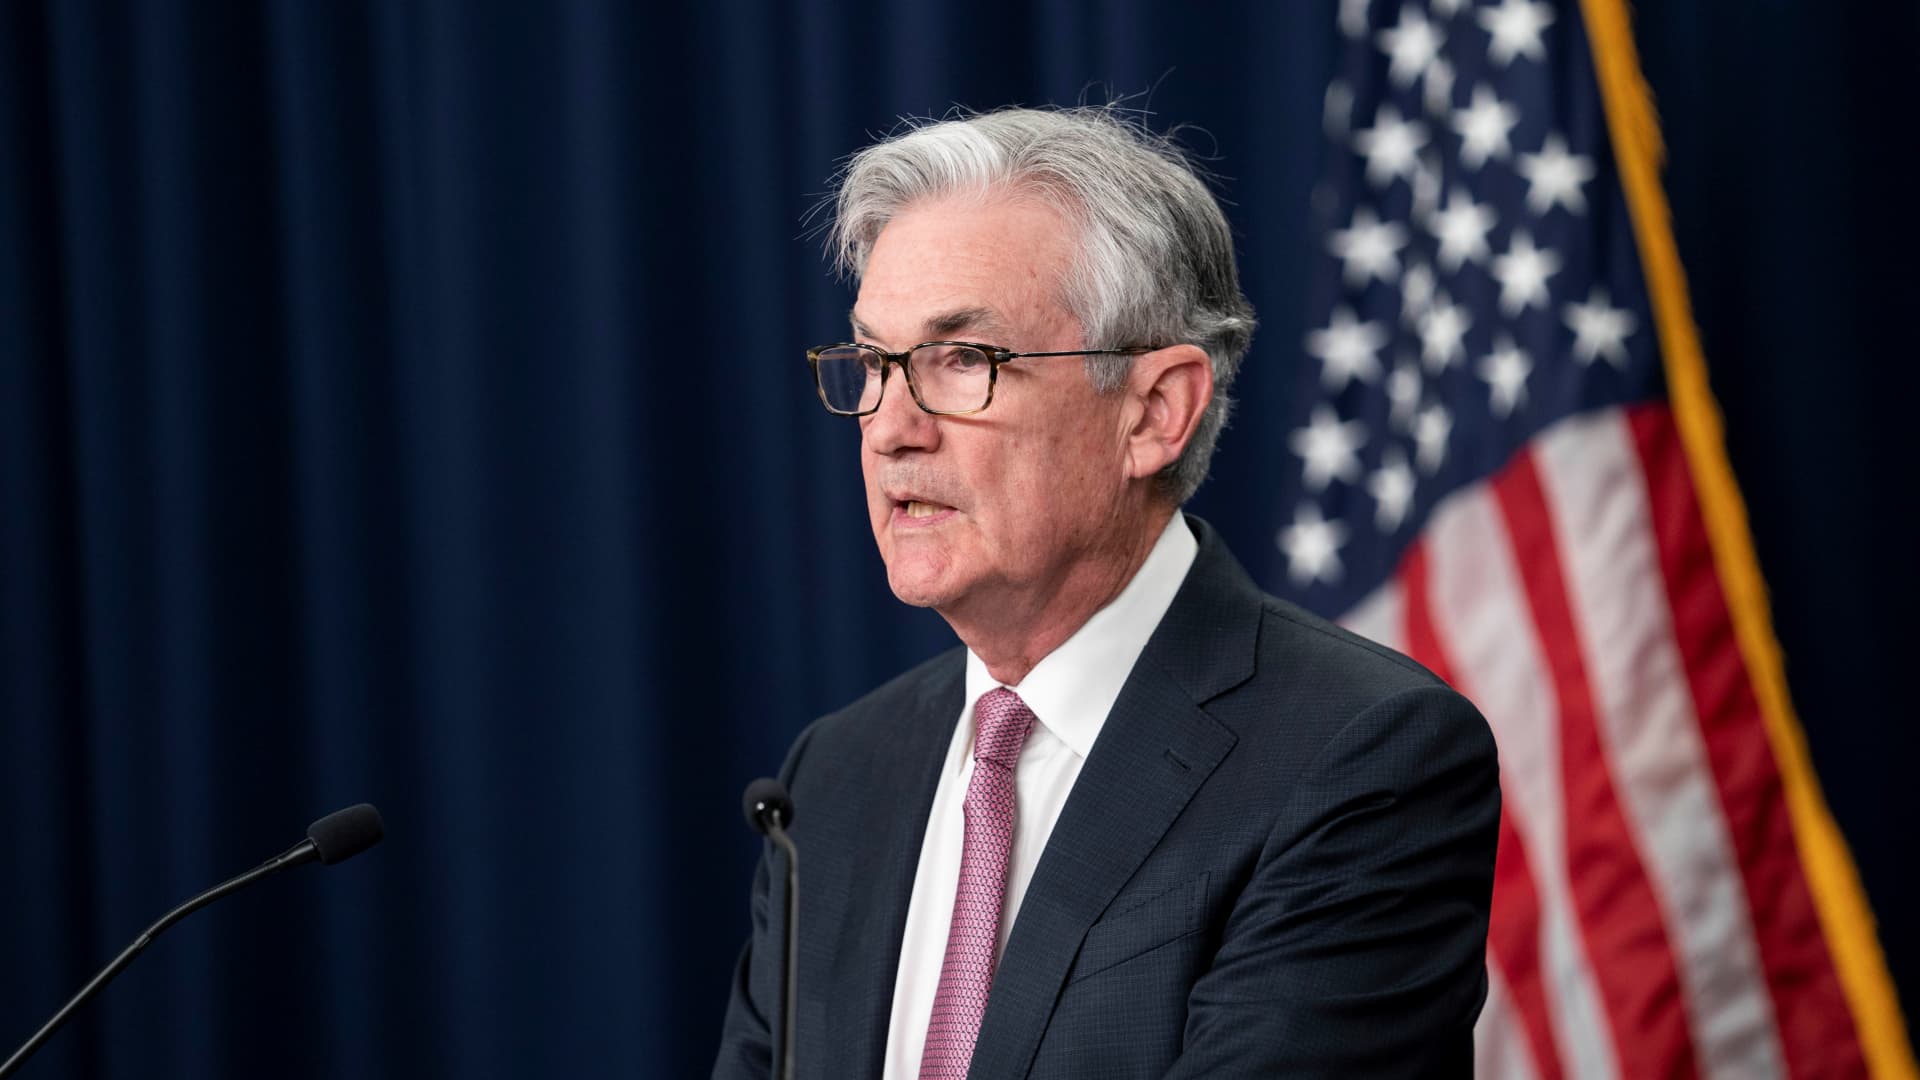 Powell says the Fed could hike rates by 0.75 percentage point again in July